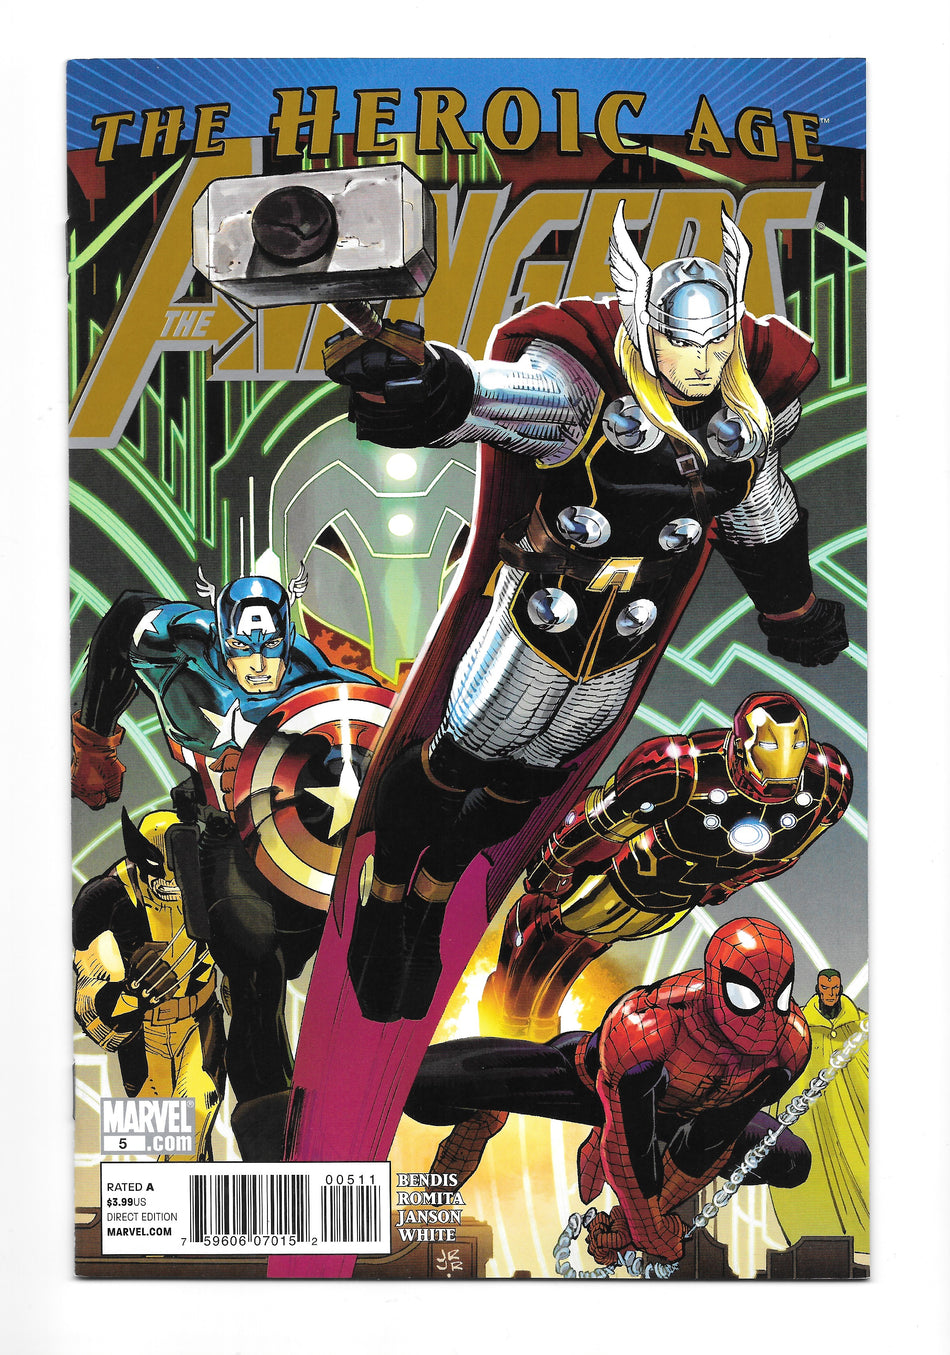 Photo of Avengers Issue 5 comic sold by Stronghold Collectibles